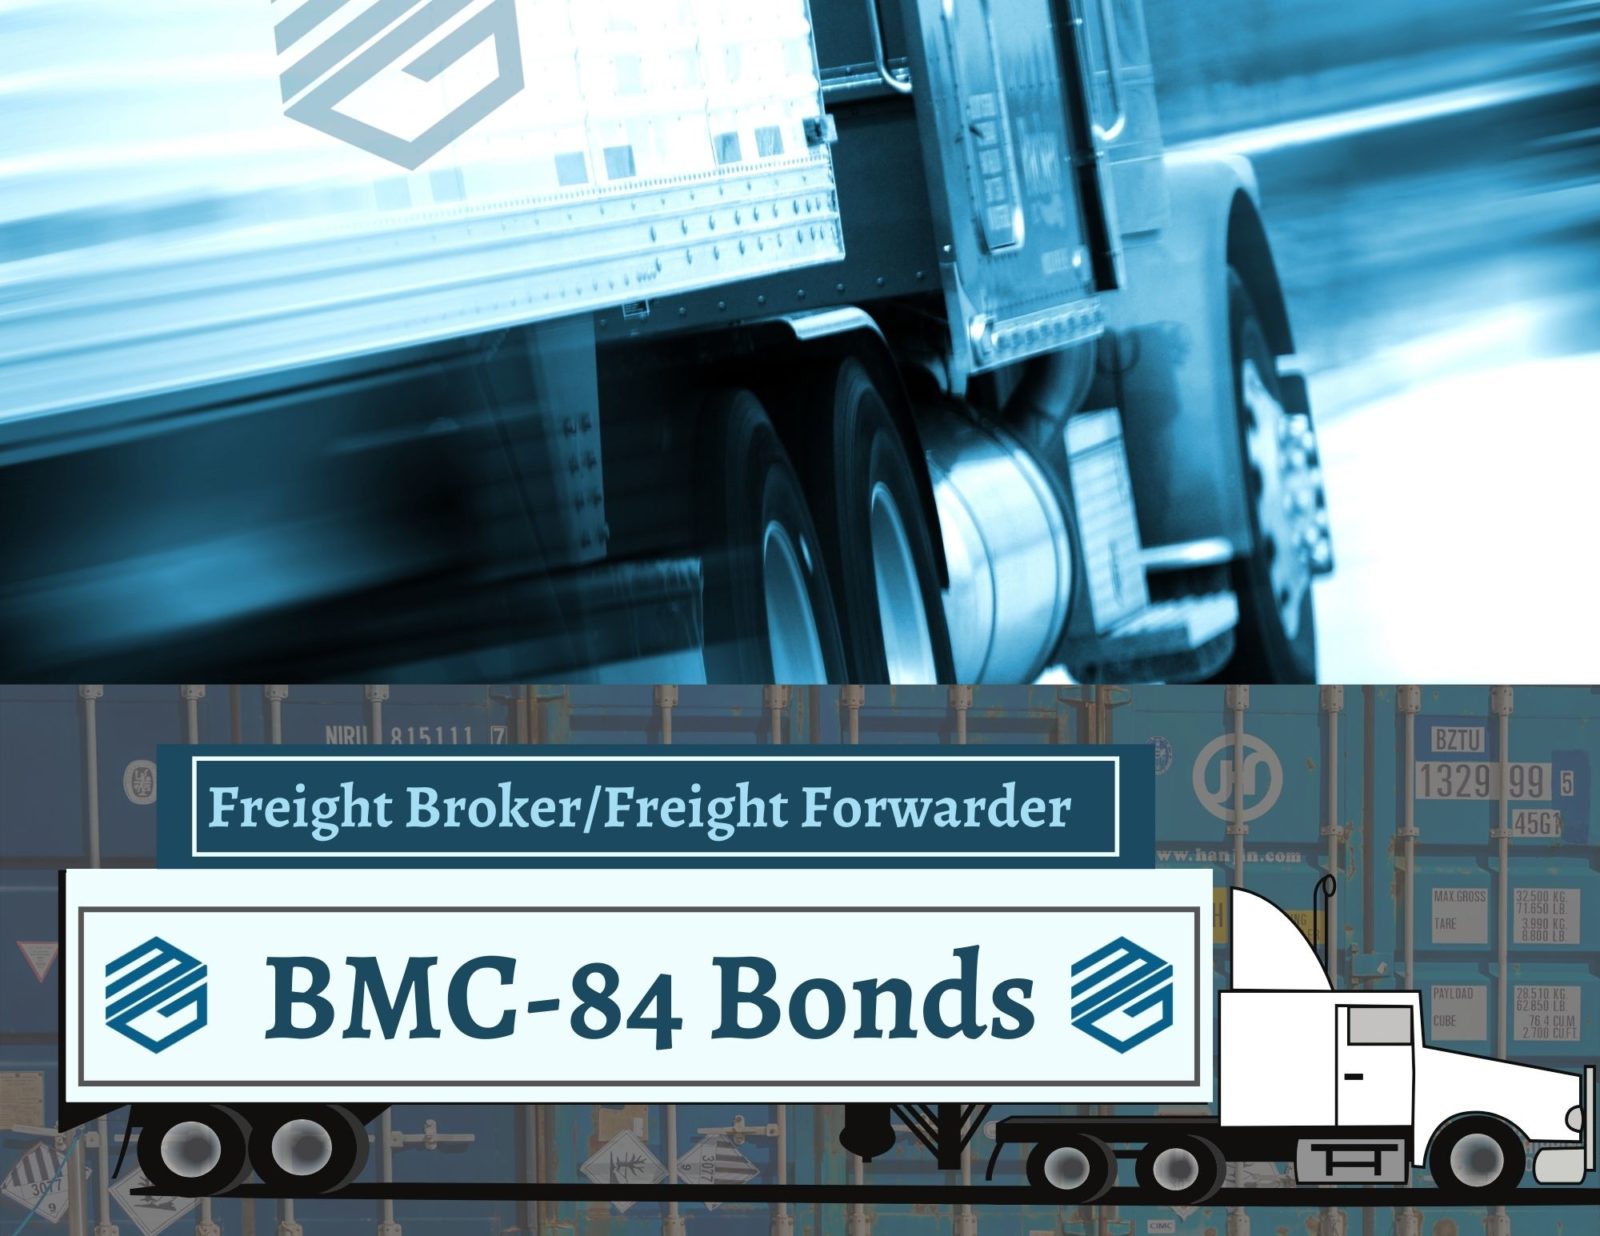 Freight Broker Bond - A Picture of a truck up top and a truck below with shipping containers in the background. The truck says, "BMC-84 Bonds".